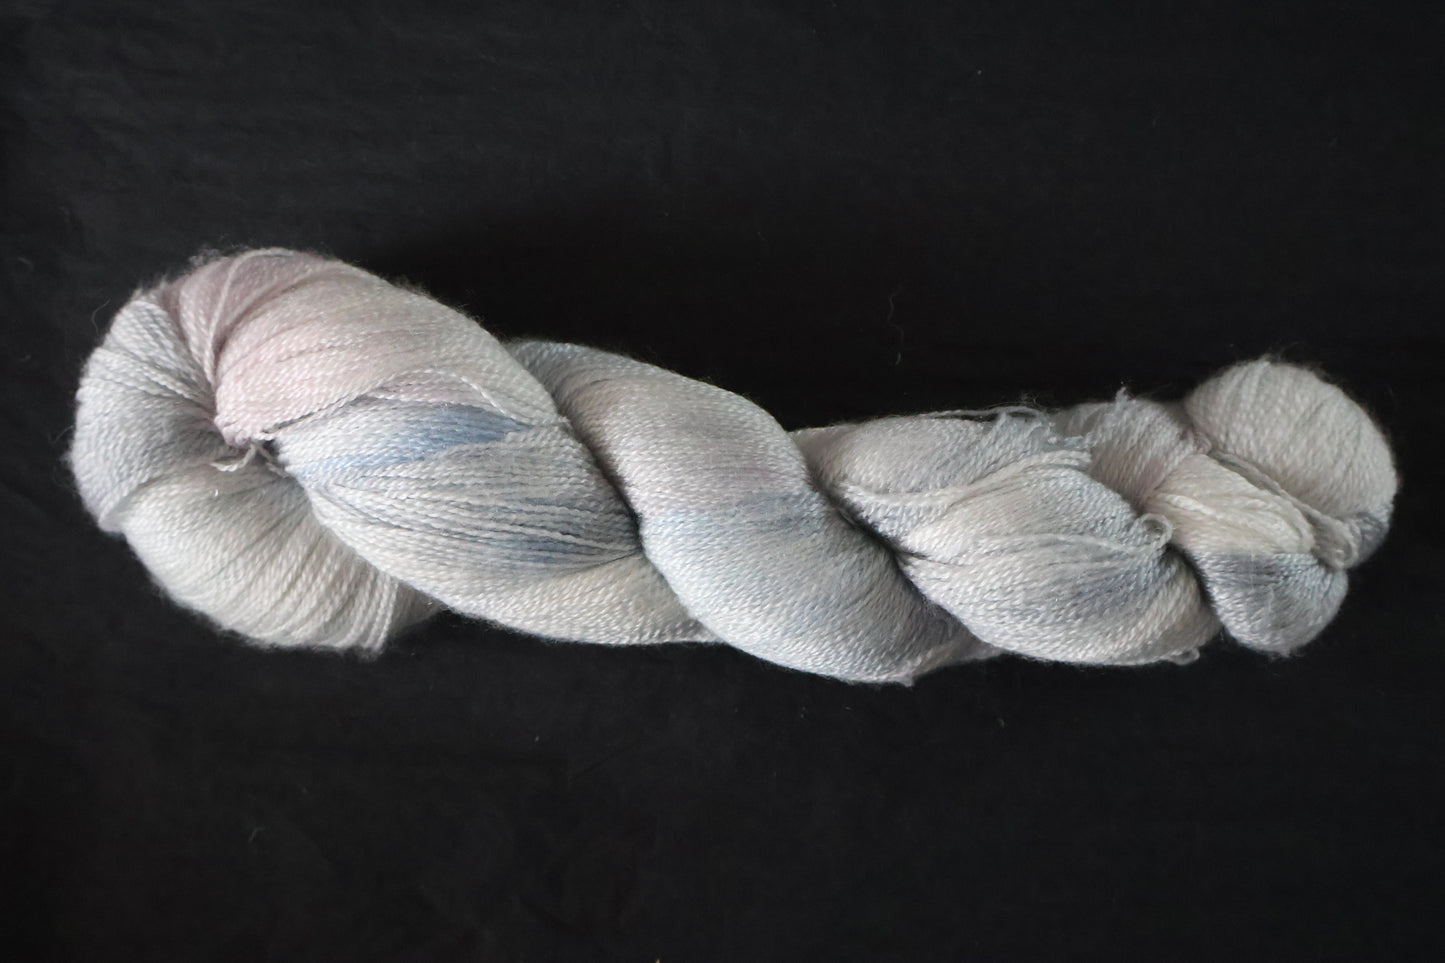 100G Merino/Tencel hand dyed luxury Lace Weight Yarn - "Anonymouse"  - ***SALE ITEM